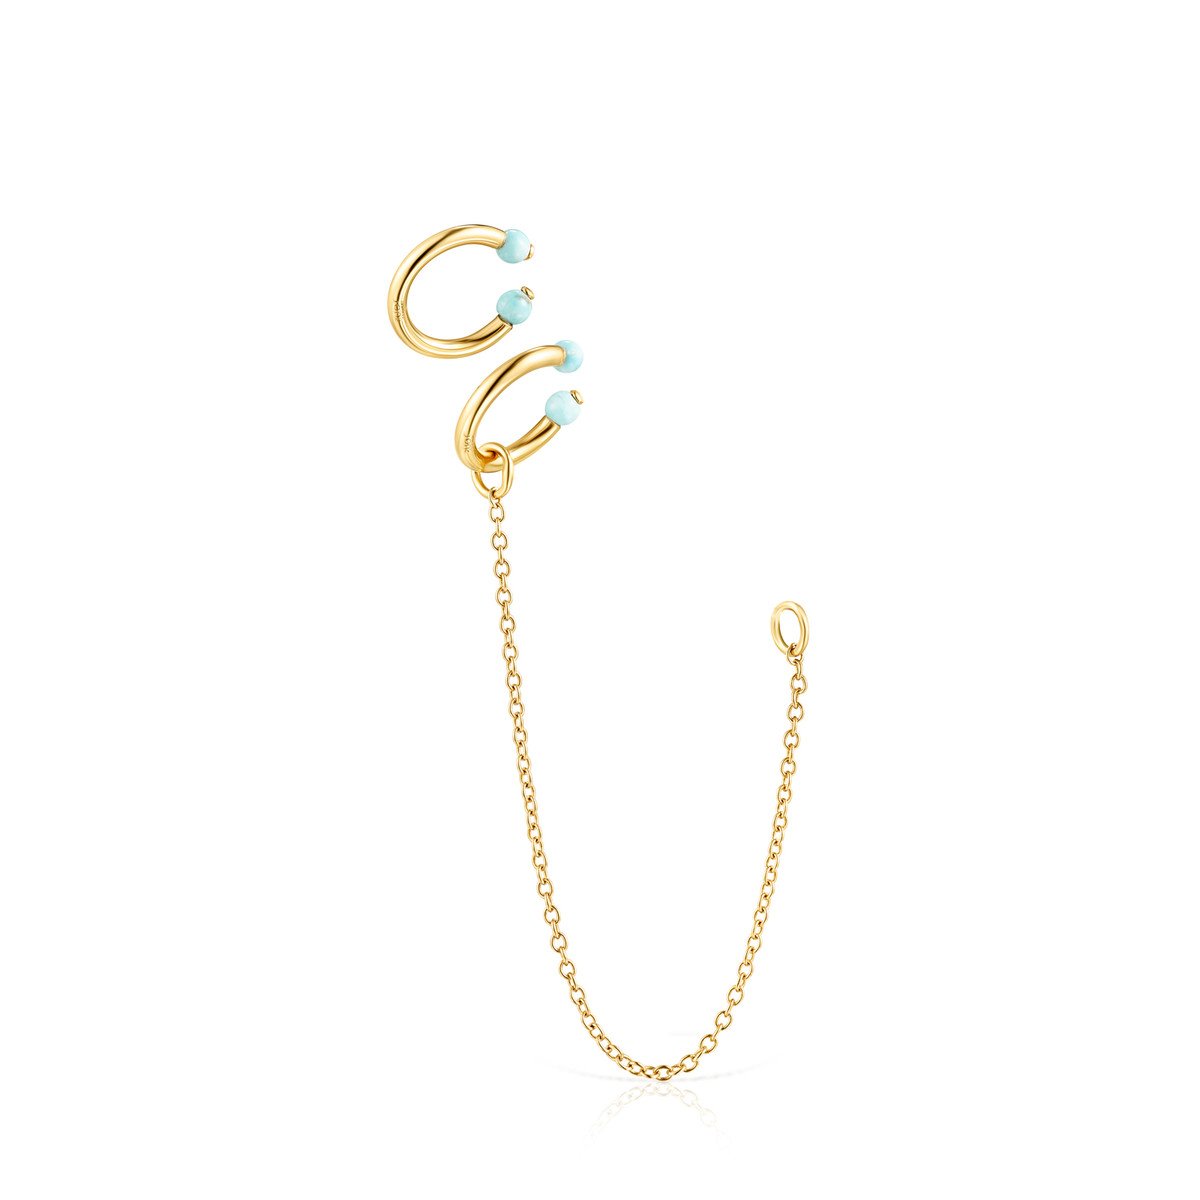 Tous Batala Earcuff Pack in Gold Vermeil with Howlite 918543670